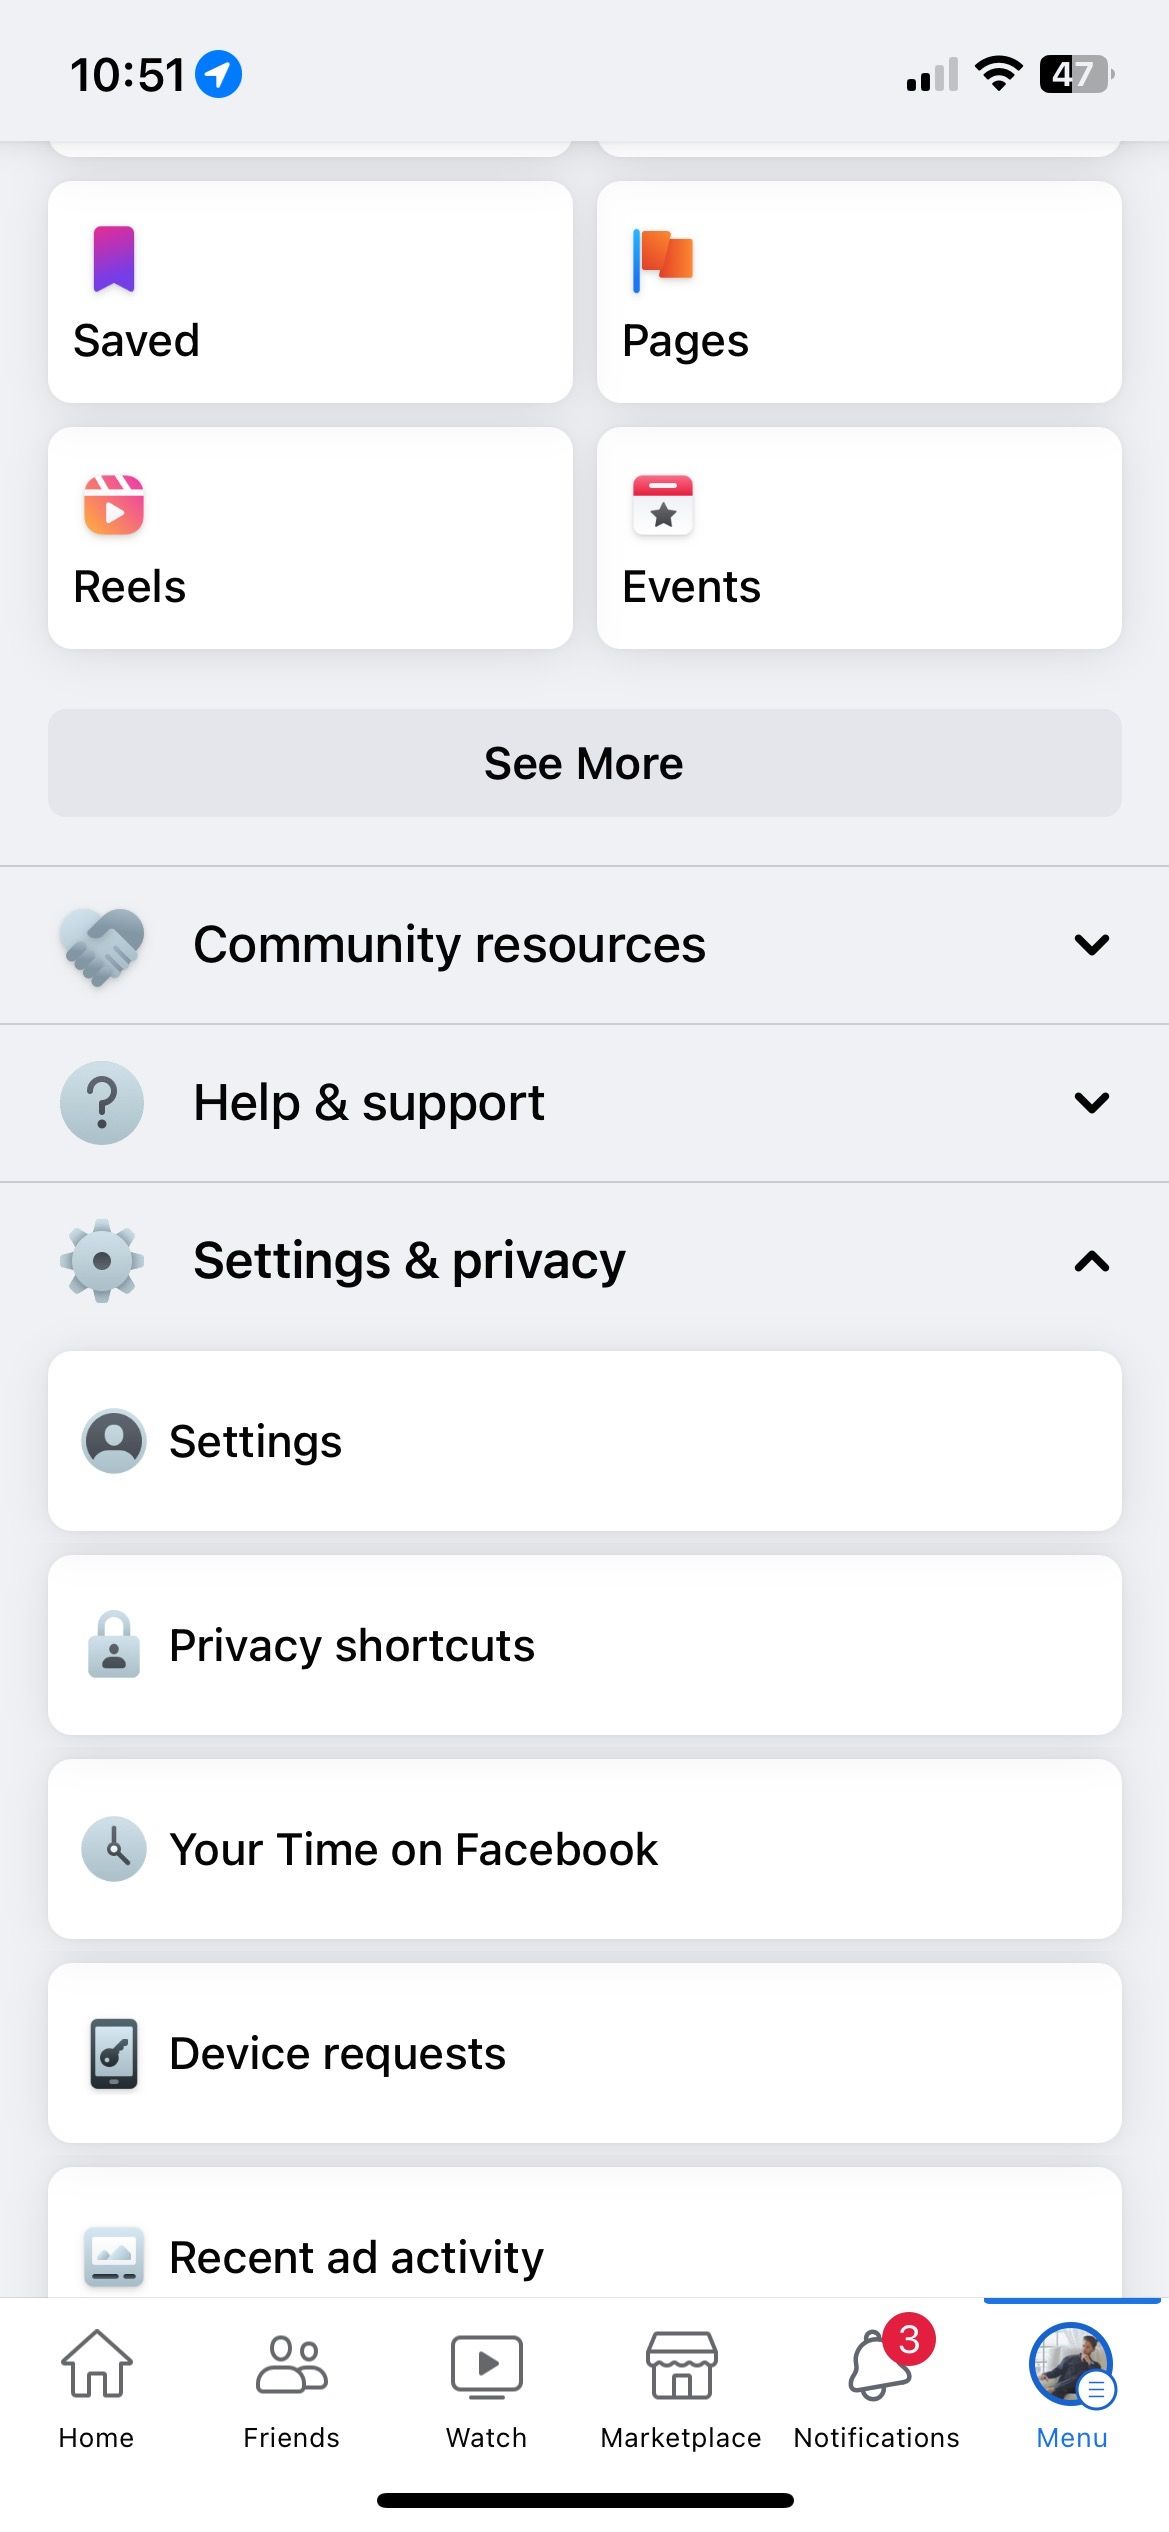 Facebook Settings and privacy